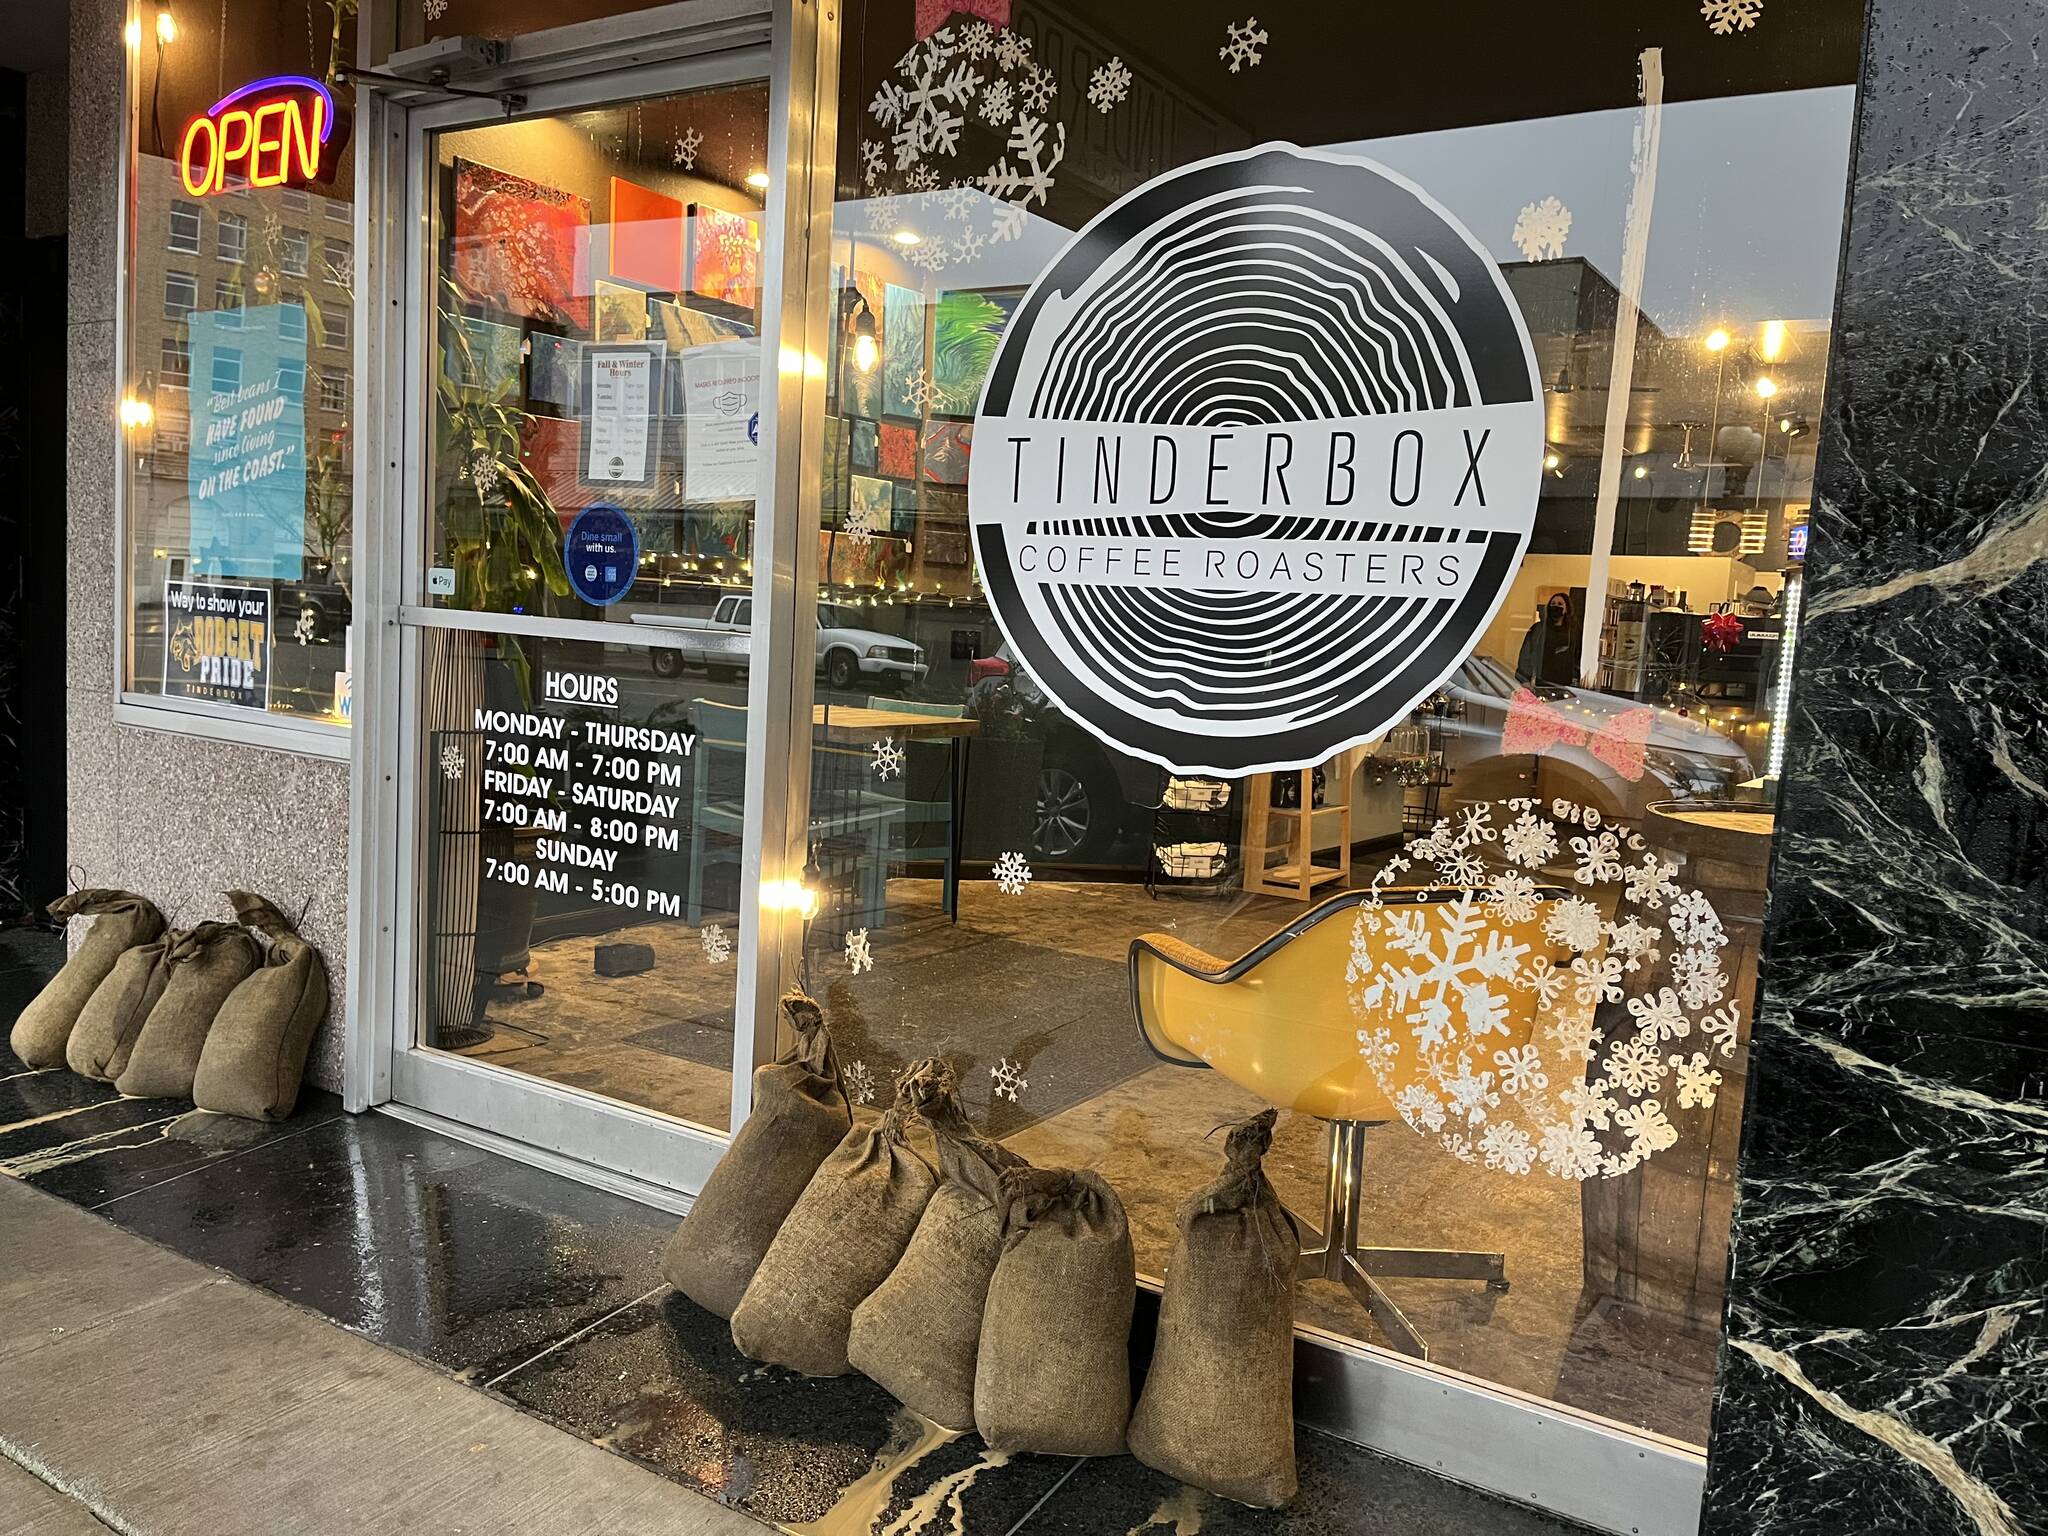 Leon O'Donnell, barista at Tinderbox Roasters, 113 E Wishkah St., said Thursday morning, Jan. 6, 2022, that his boss brought in sandbags to help when high tide comes in. Matthew N. Wells | The Daily World